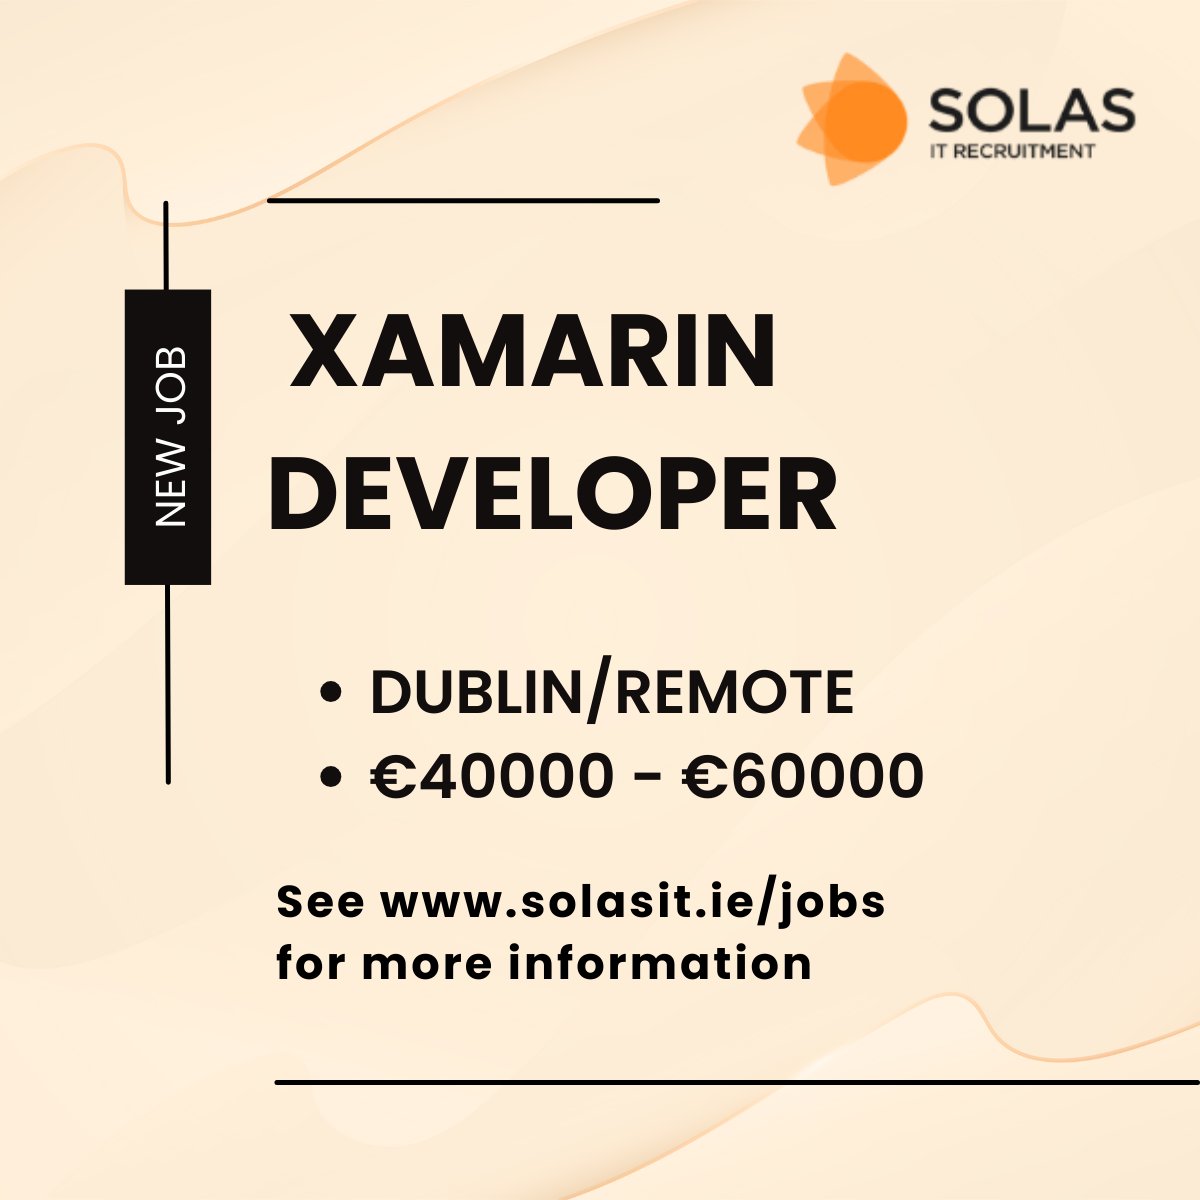 We're hiring an Xamarin Developer for a role in Dublin.

For more information and to apply, see our website.

#xamarin #JobFairy #DeveloperJobs